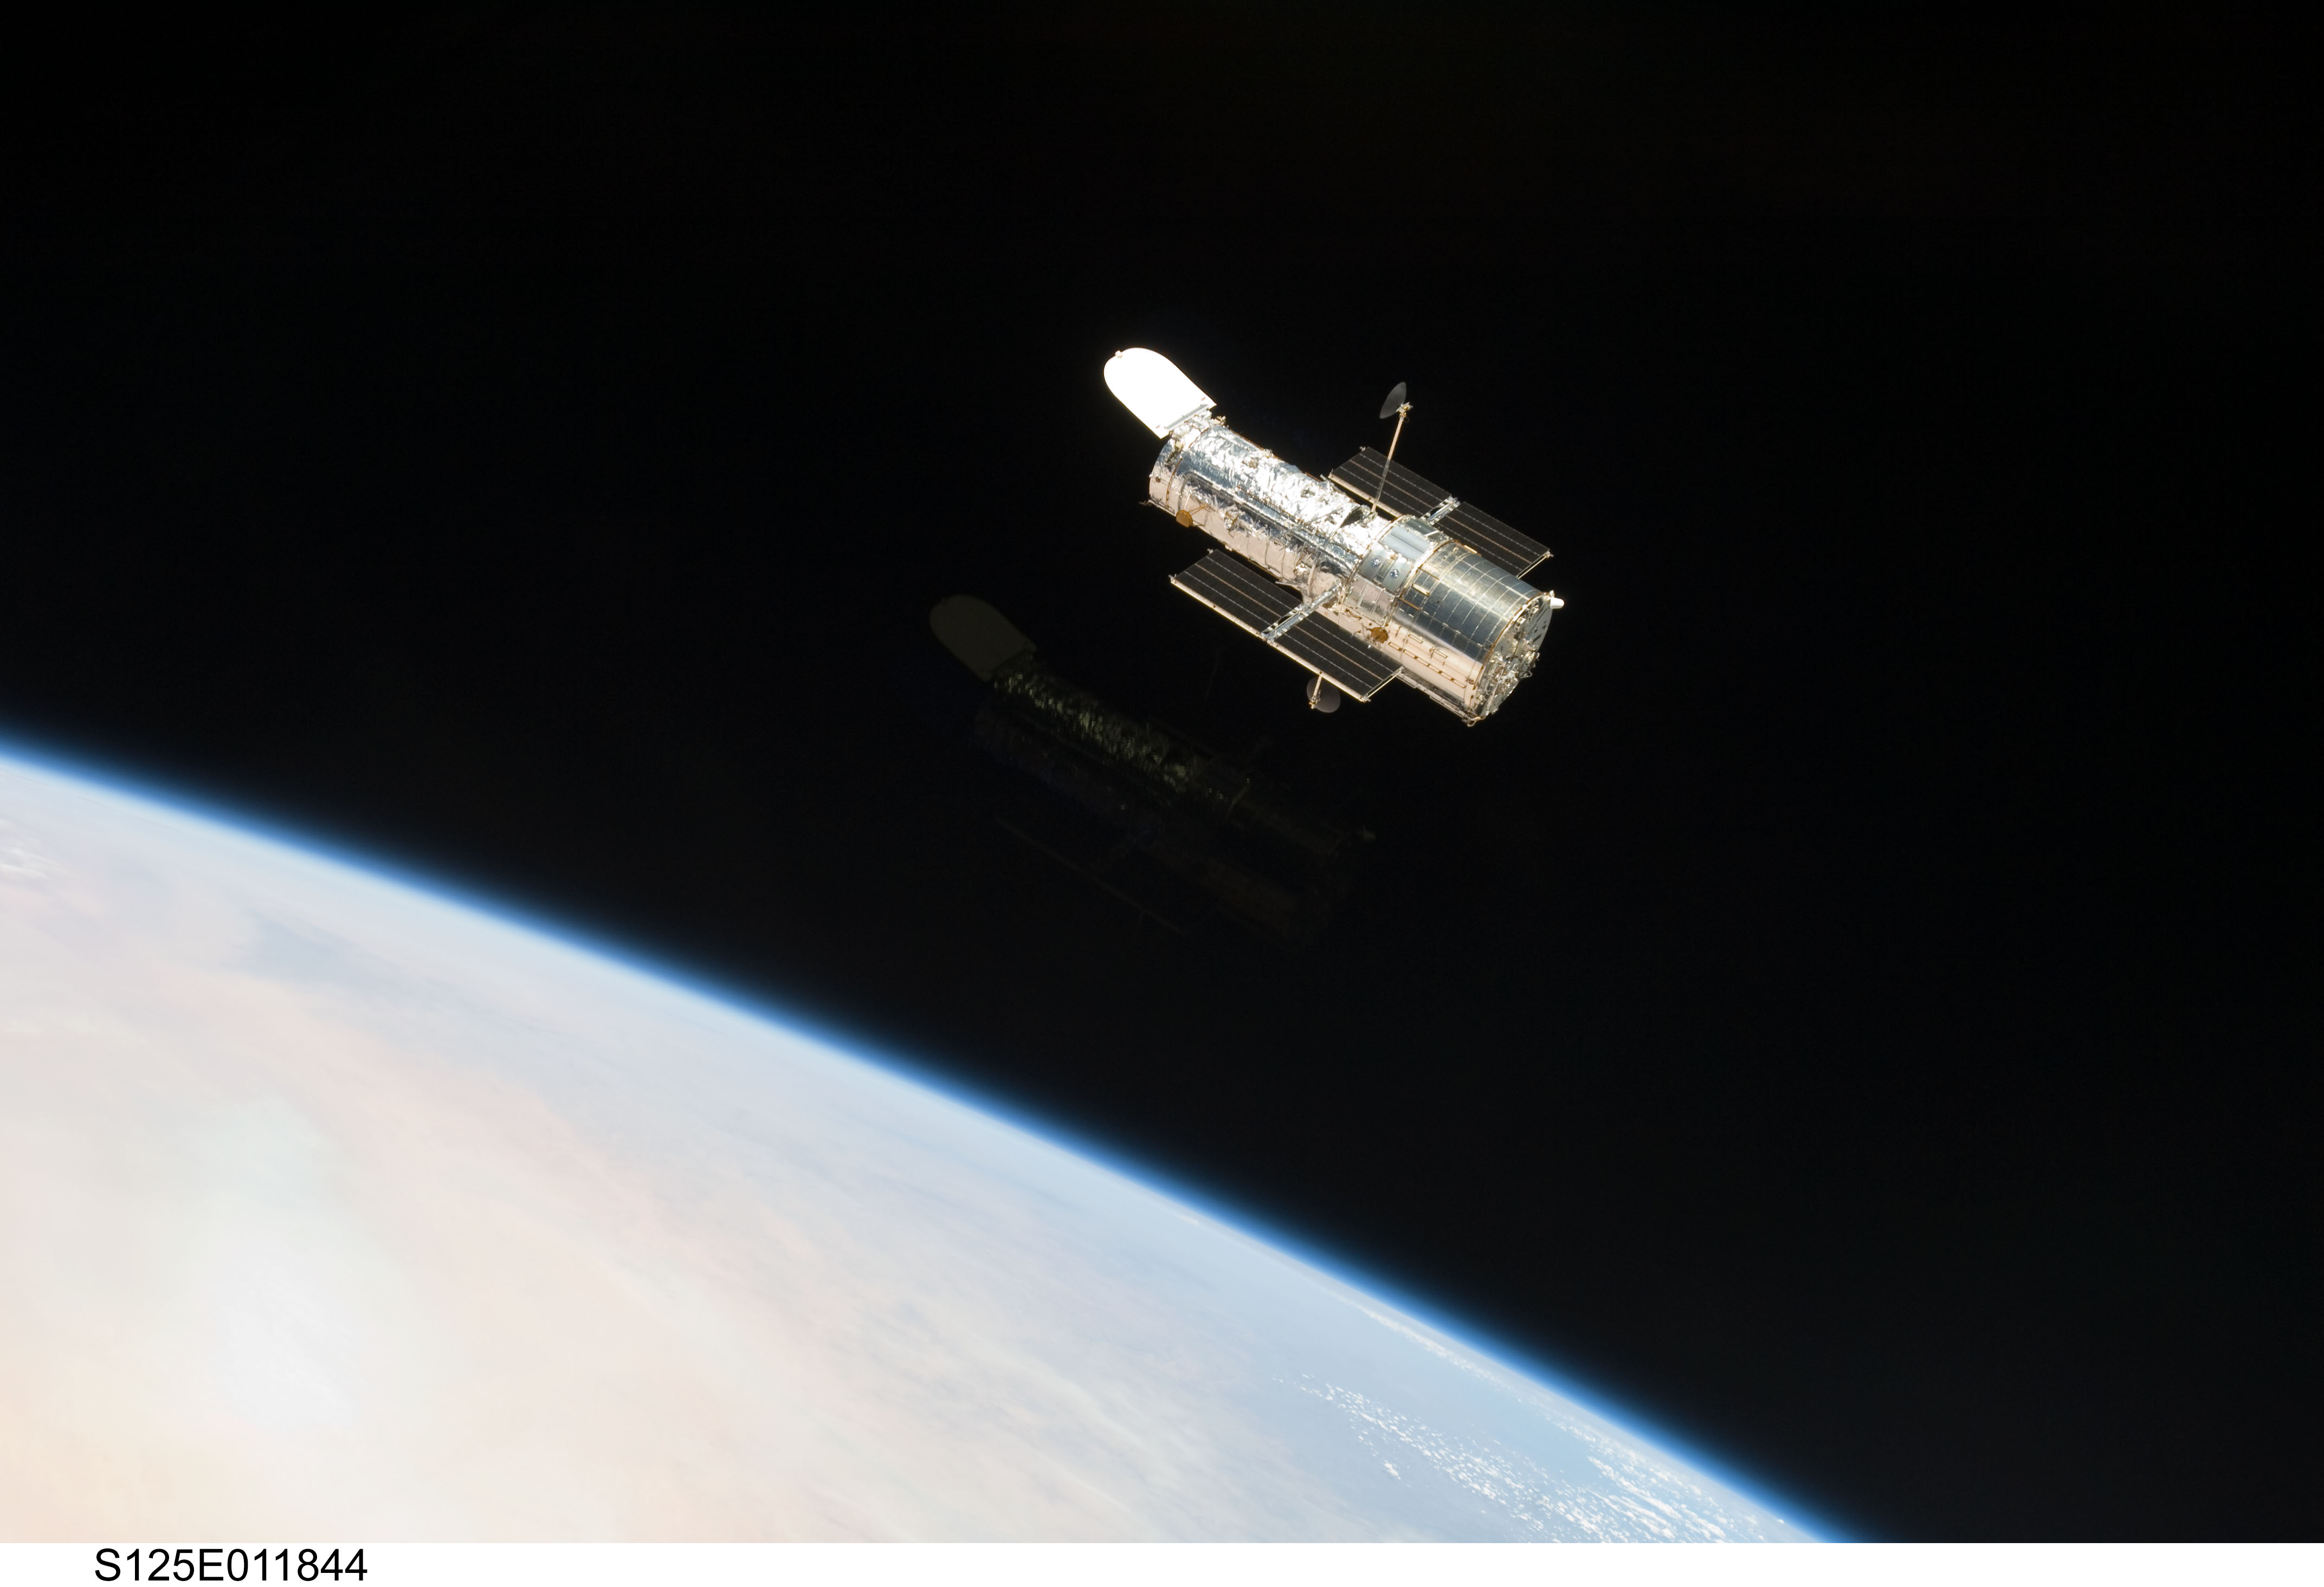 NASA’s Hubble Space Telescope Returns to Science Operations